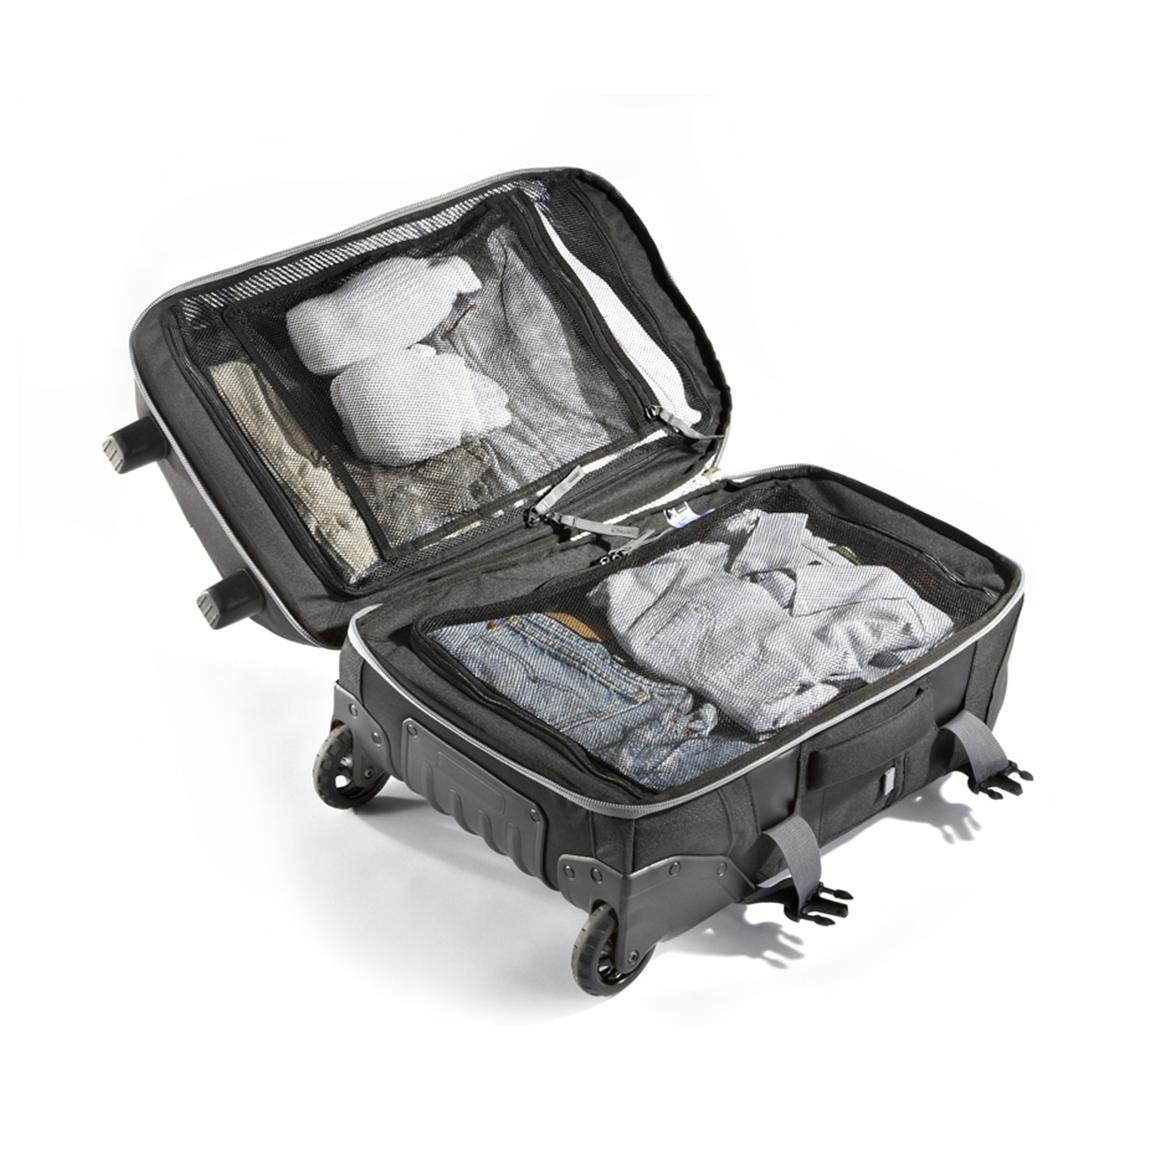 Oakley® Wheeled Carry-on Suitcase - 227699, Luggage at Sportsman's Guide